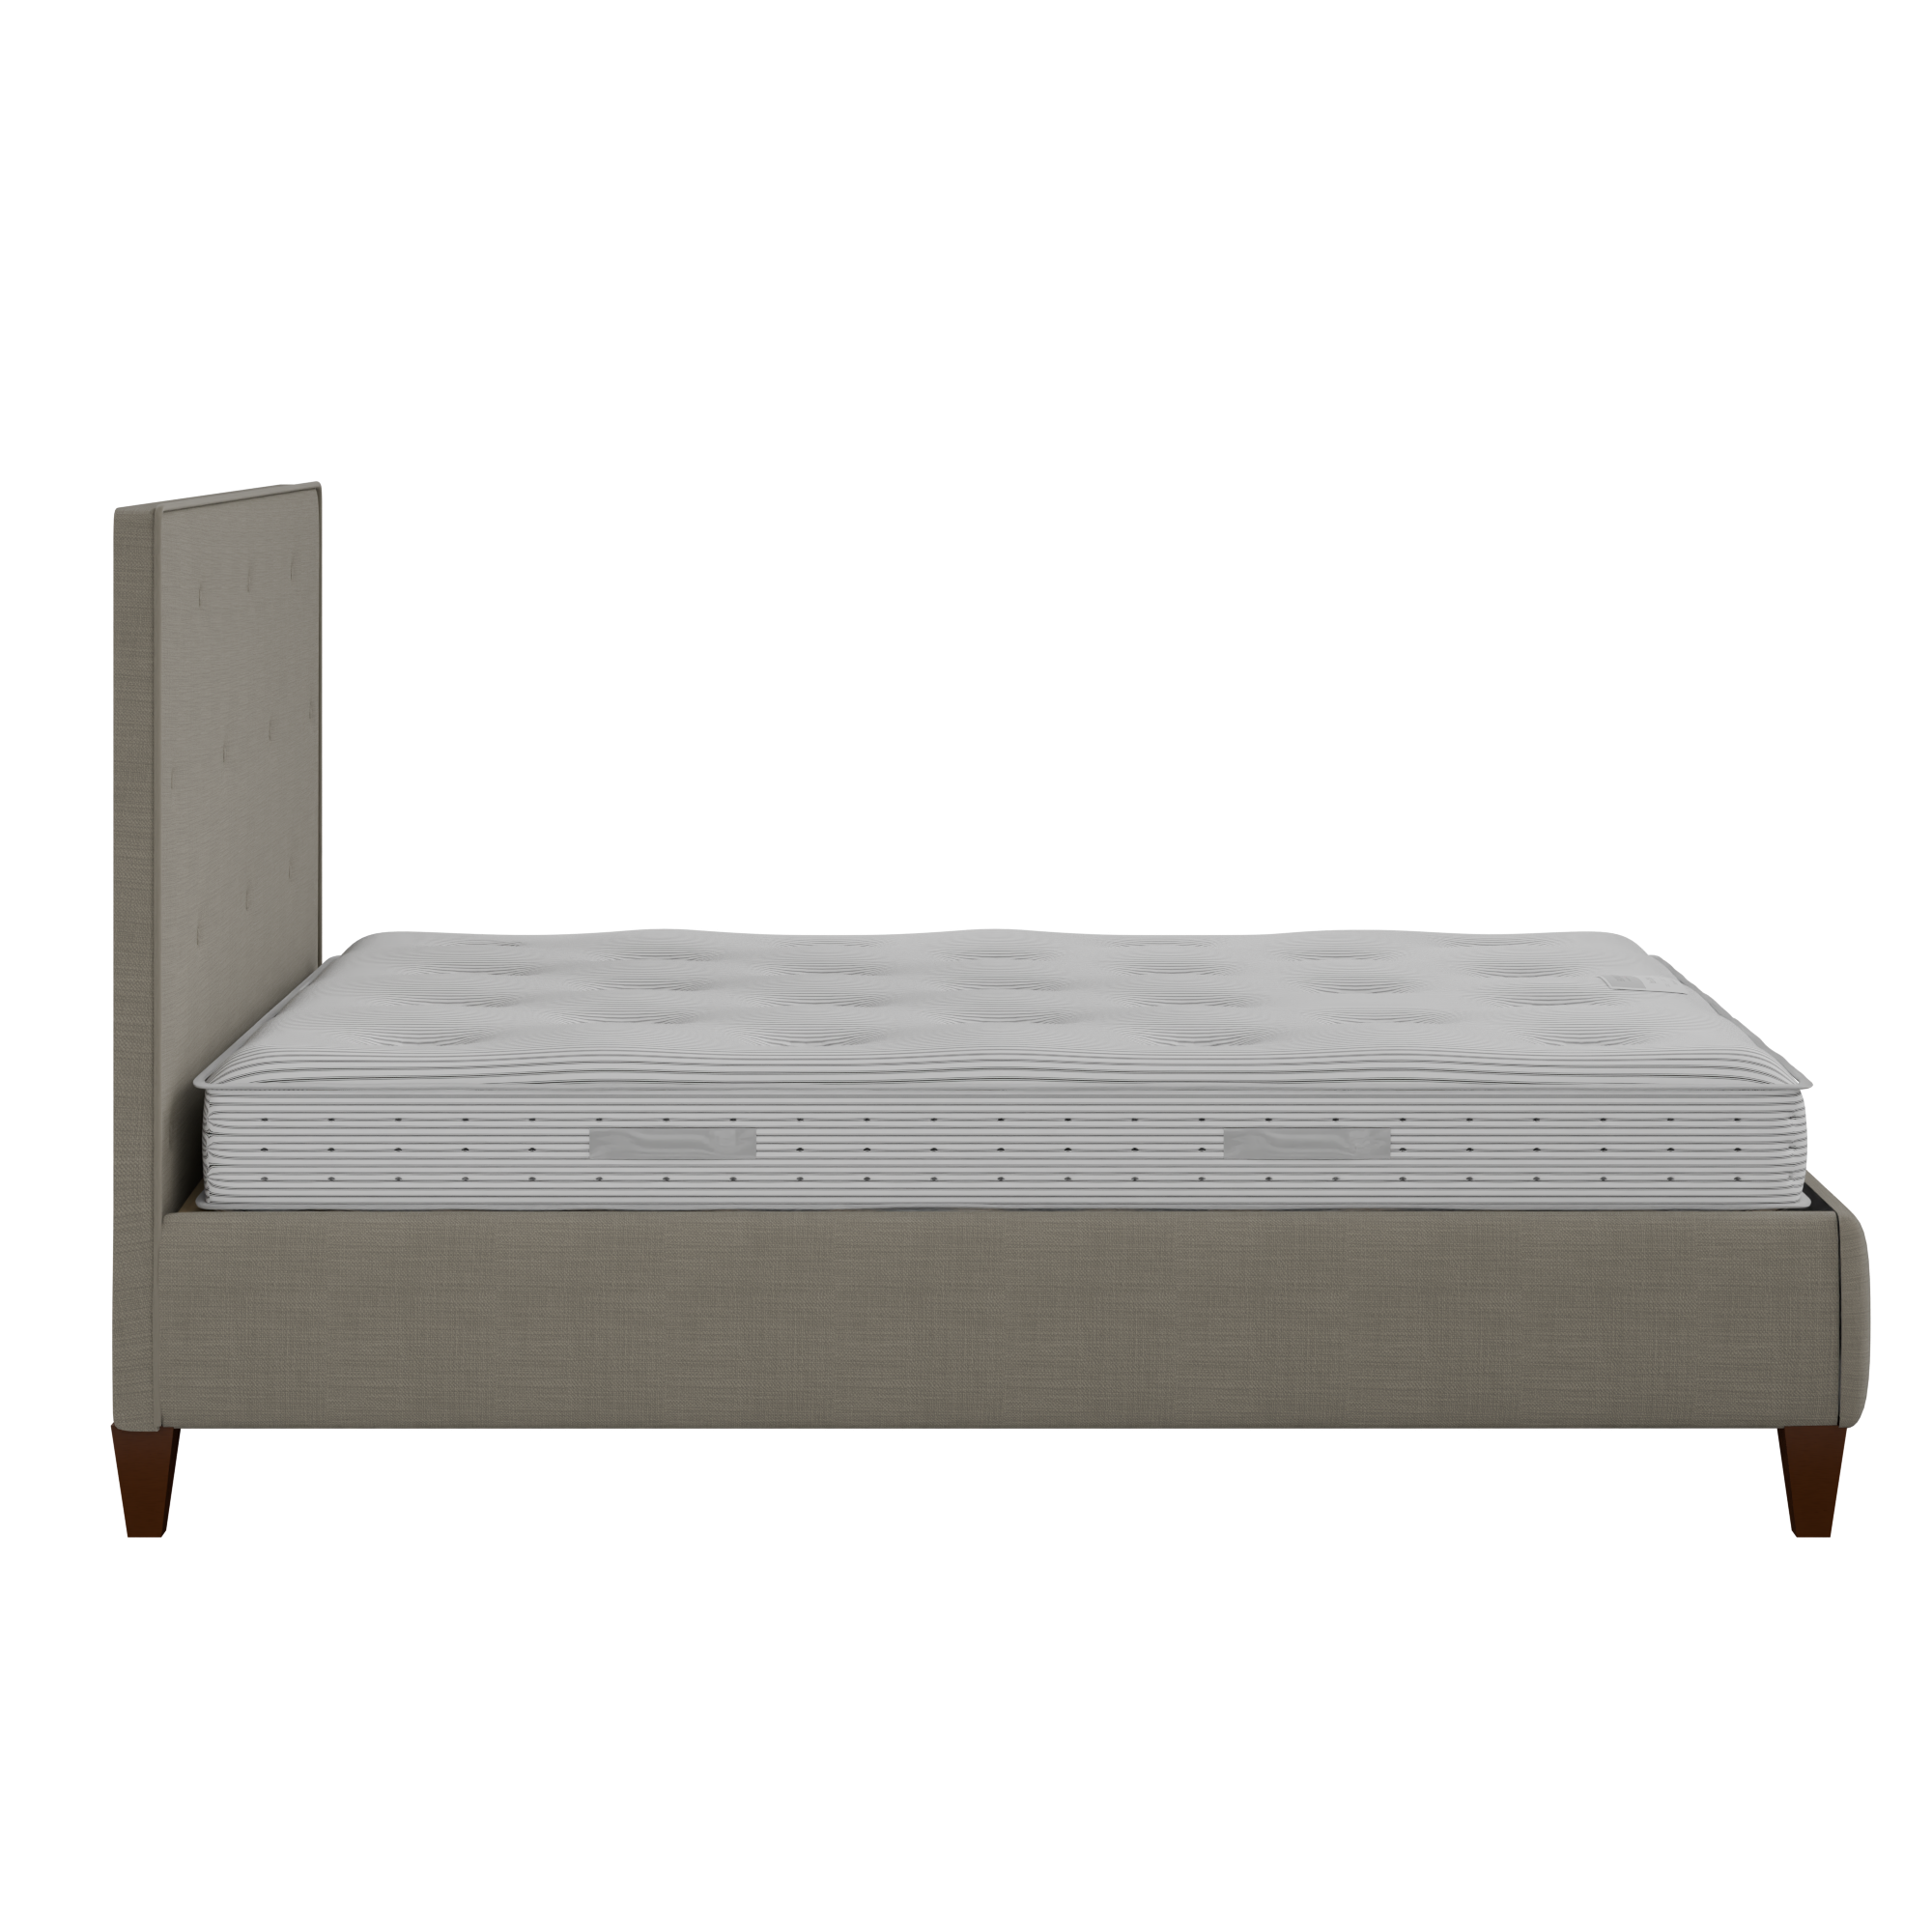 Yushan Buttoned Diagonal stoffen bed in grijs met lades